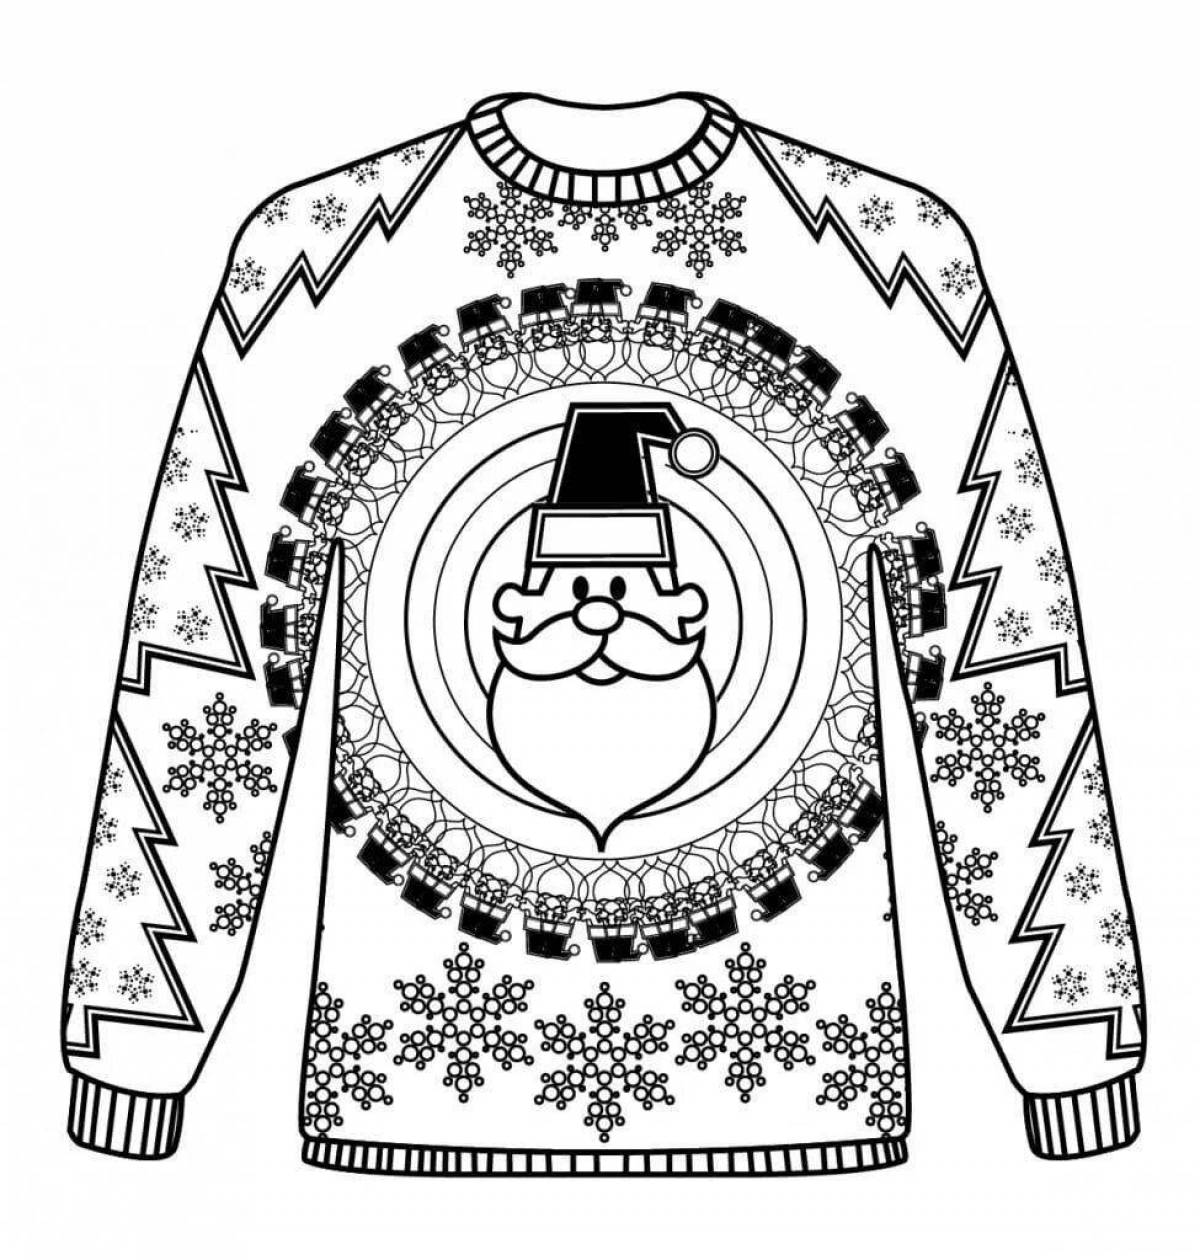 Glitter sweater coloring page for preschoolers